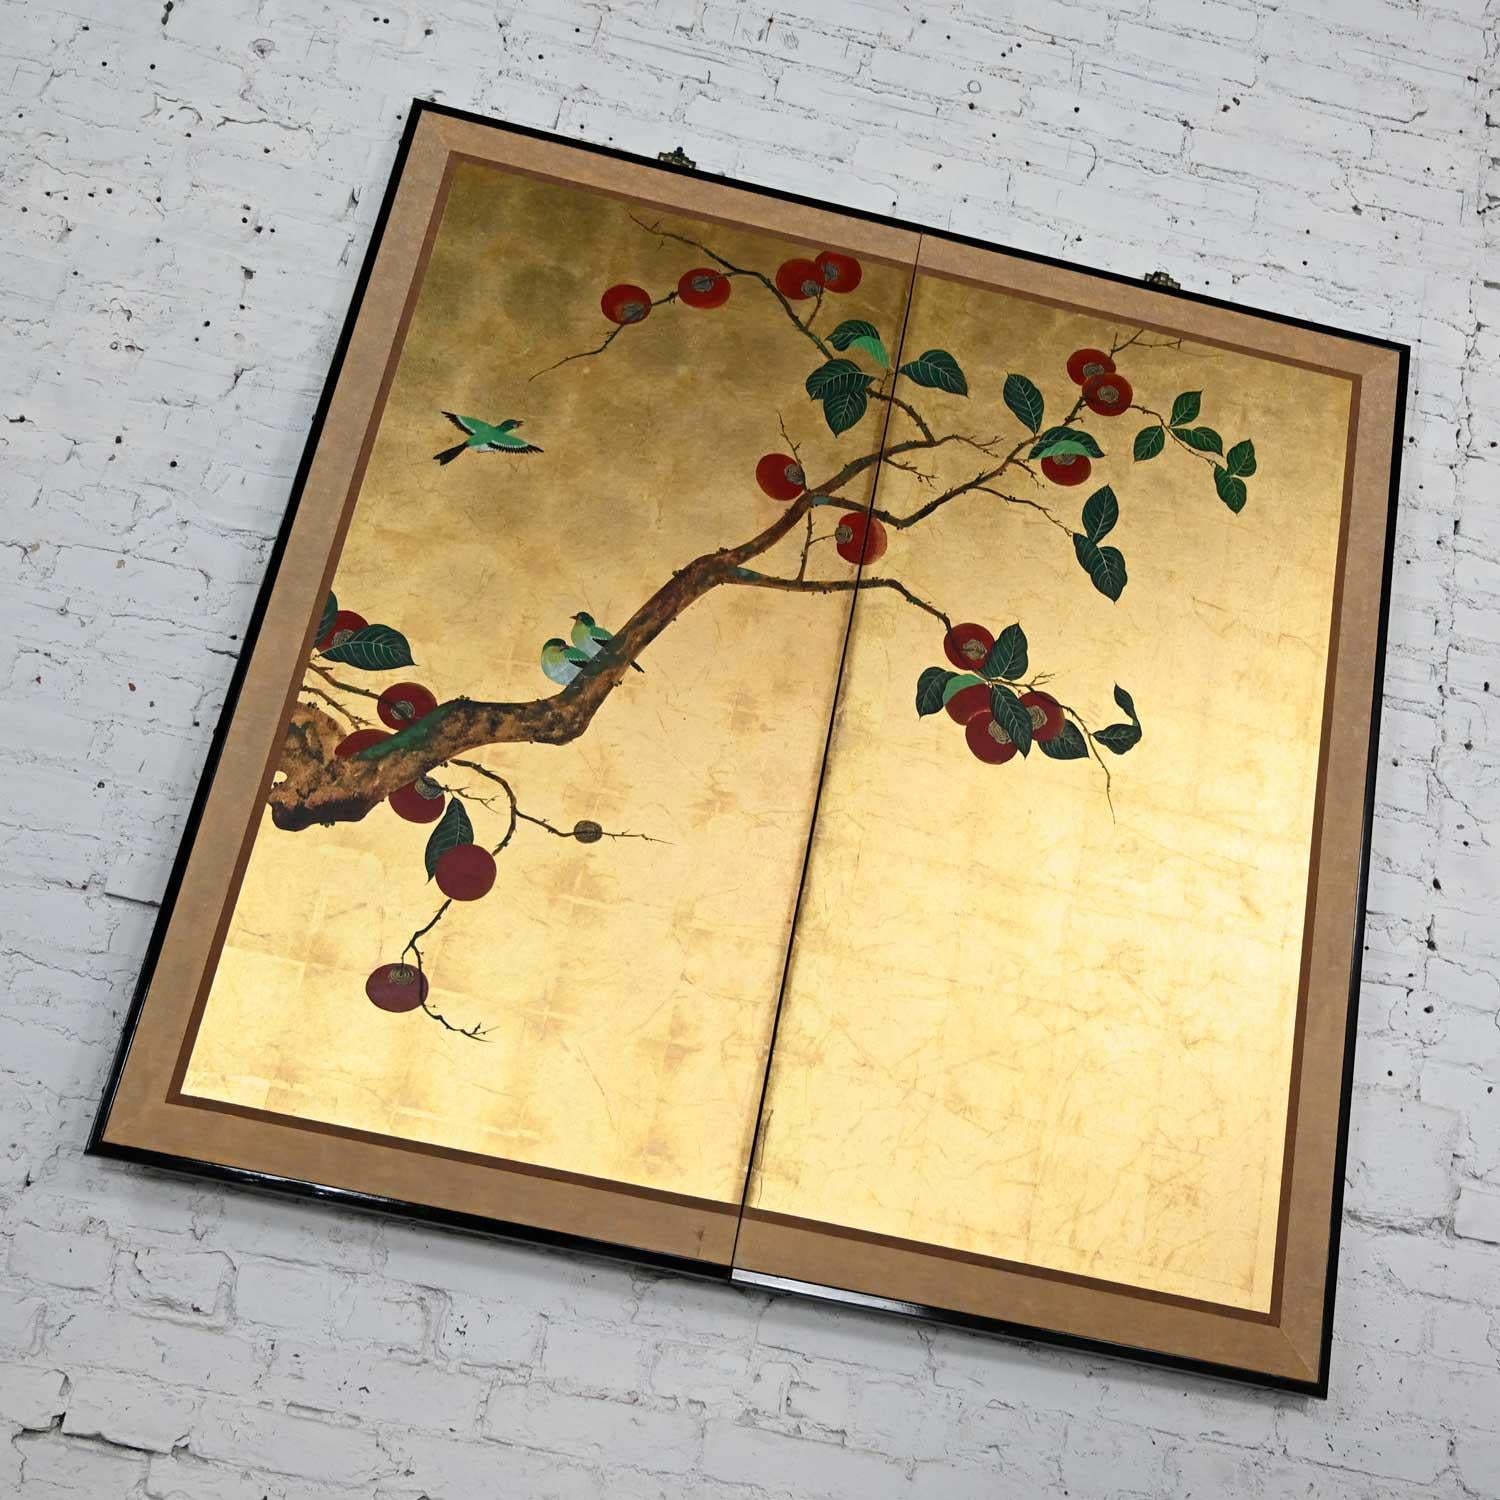 Japonisme Asian Chinoiserie Framed Gold Leafed Paper Two Panel Screen or Wall Hanging